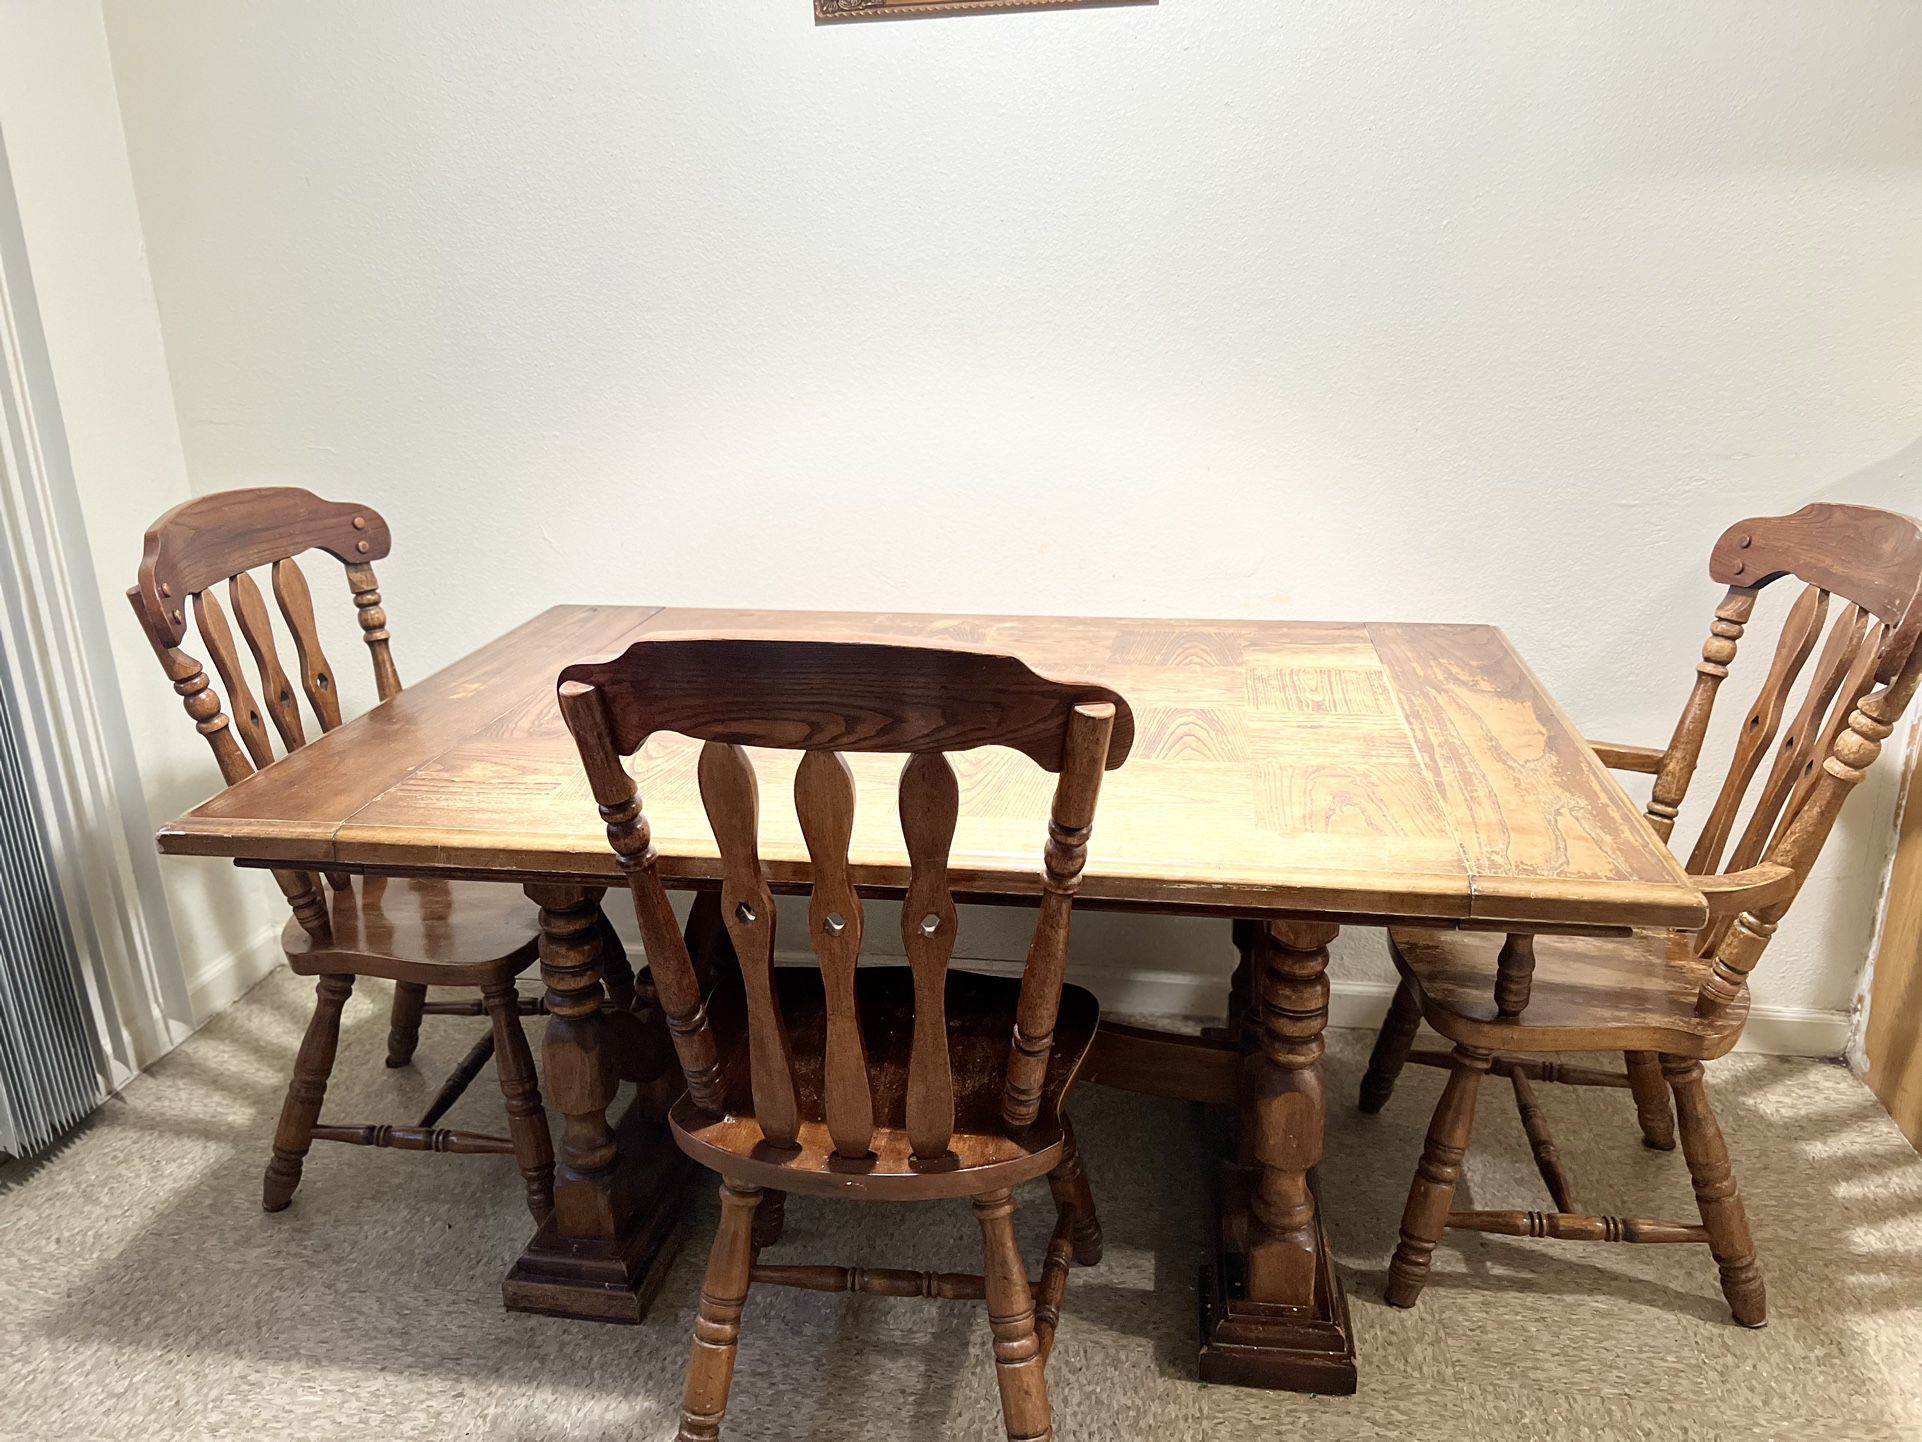 4 Chairs Table 